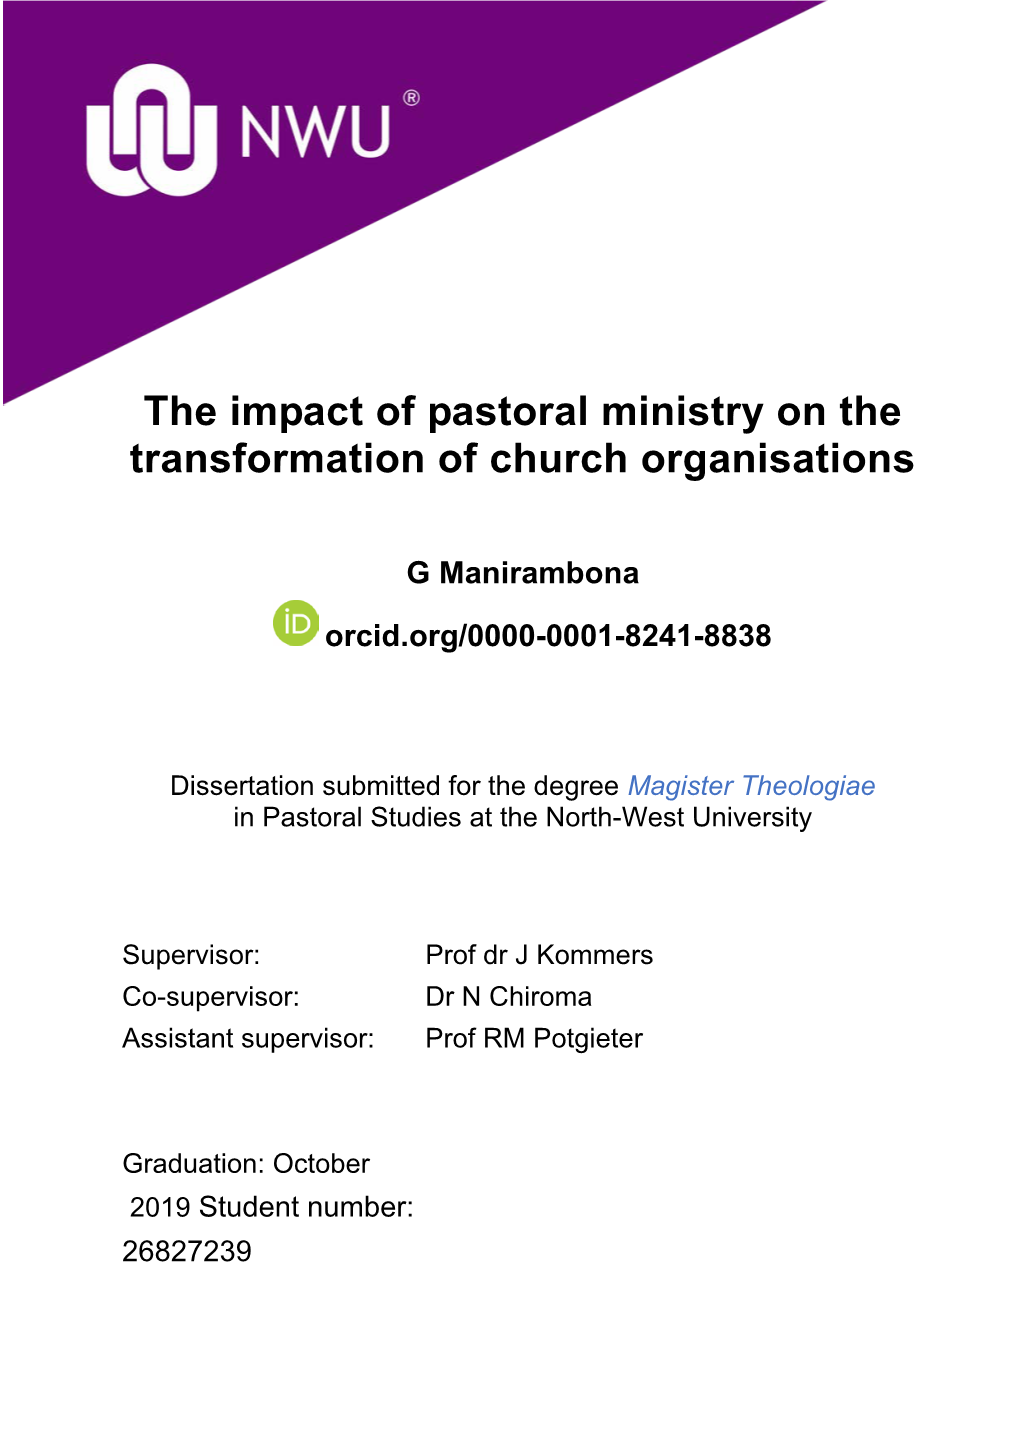 The Impact of Pastoral Ministry on the Transformation of Church Organisations